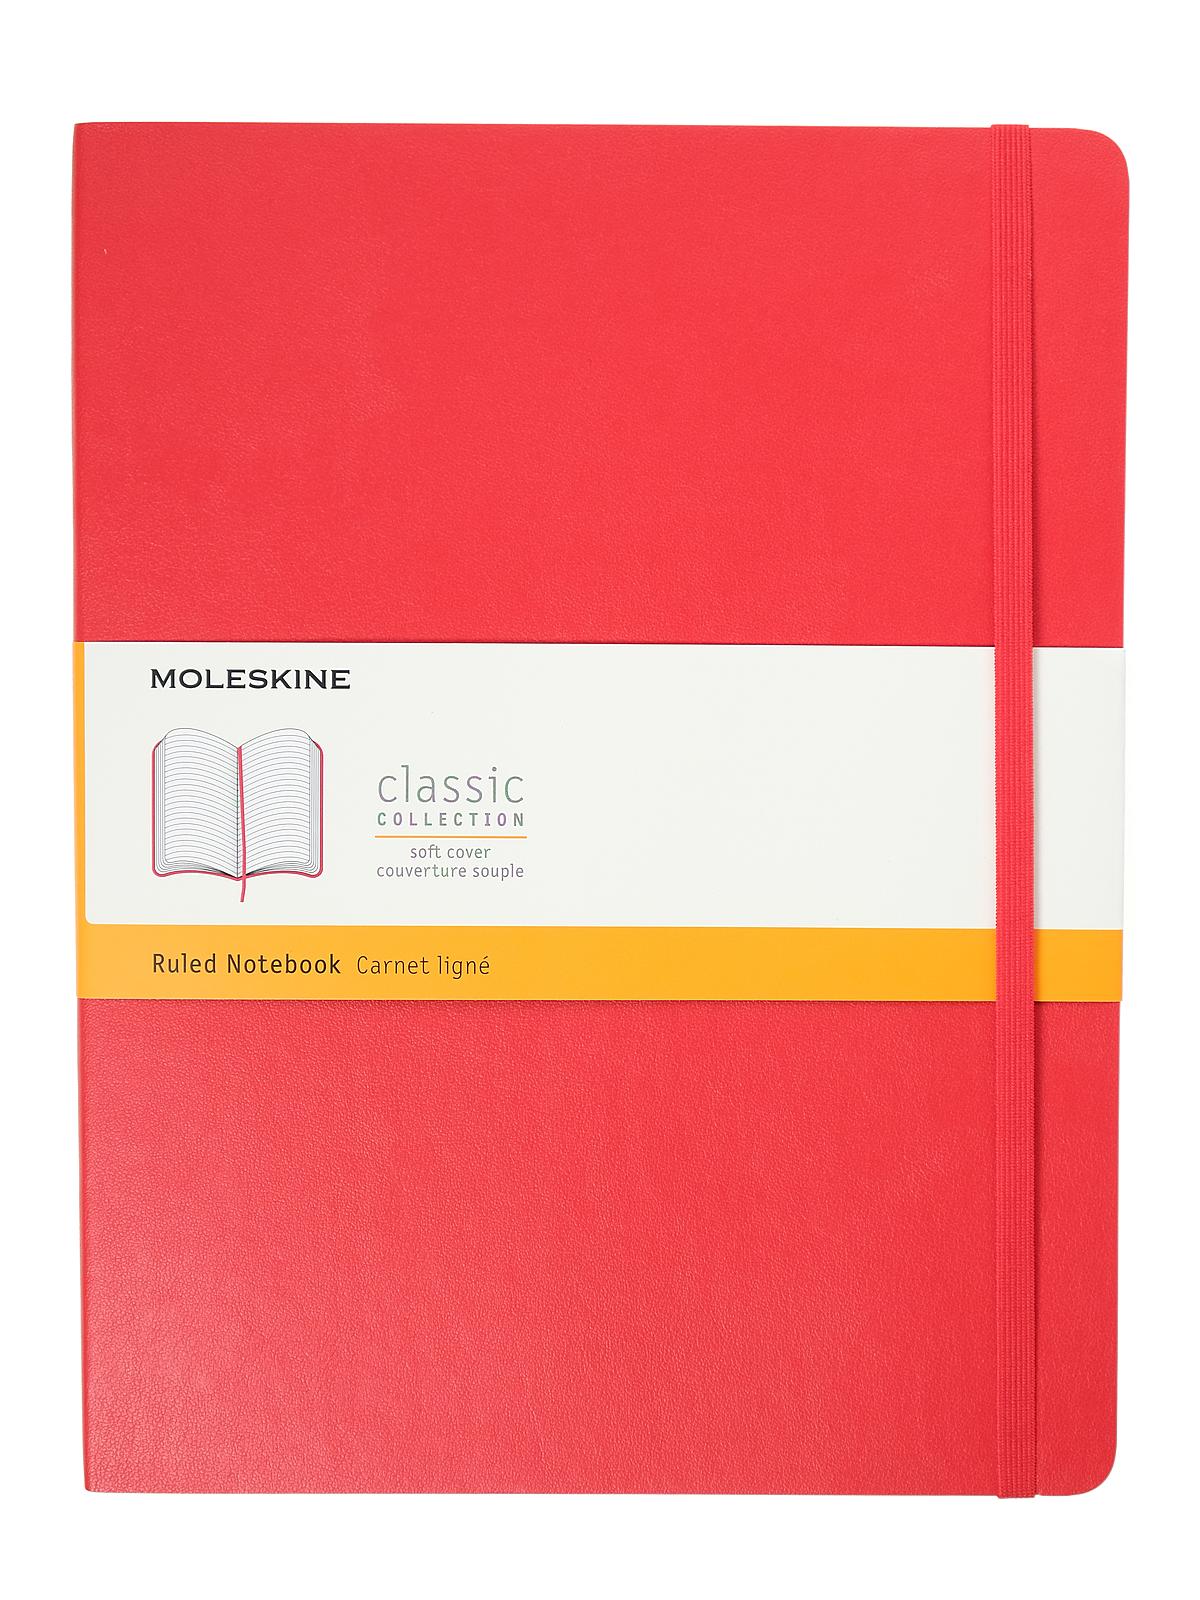 Classic Soft Cover Notebooks Red 7 1 2 In. X 9 3 4 In. 192 Pages, Lined